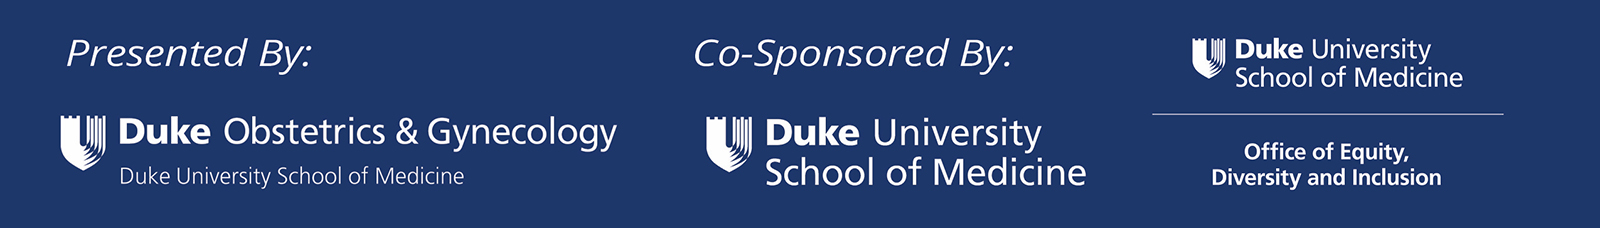 Donald T. Moore, MD,  Endowed Lecture sponsors